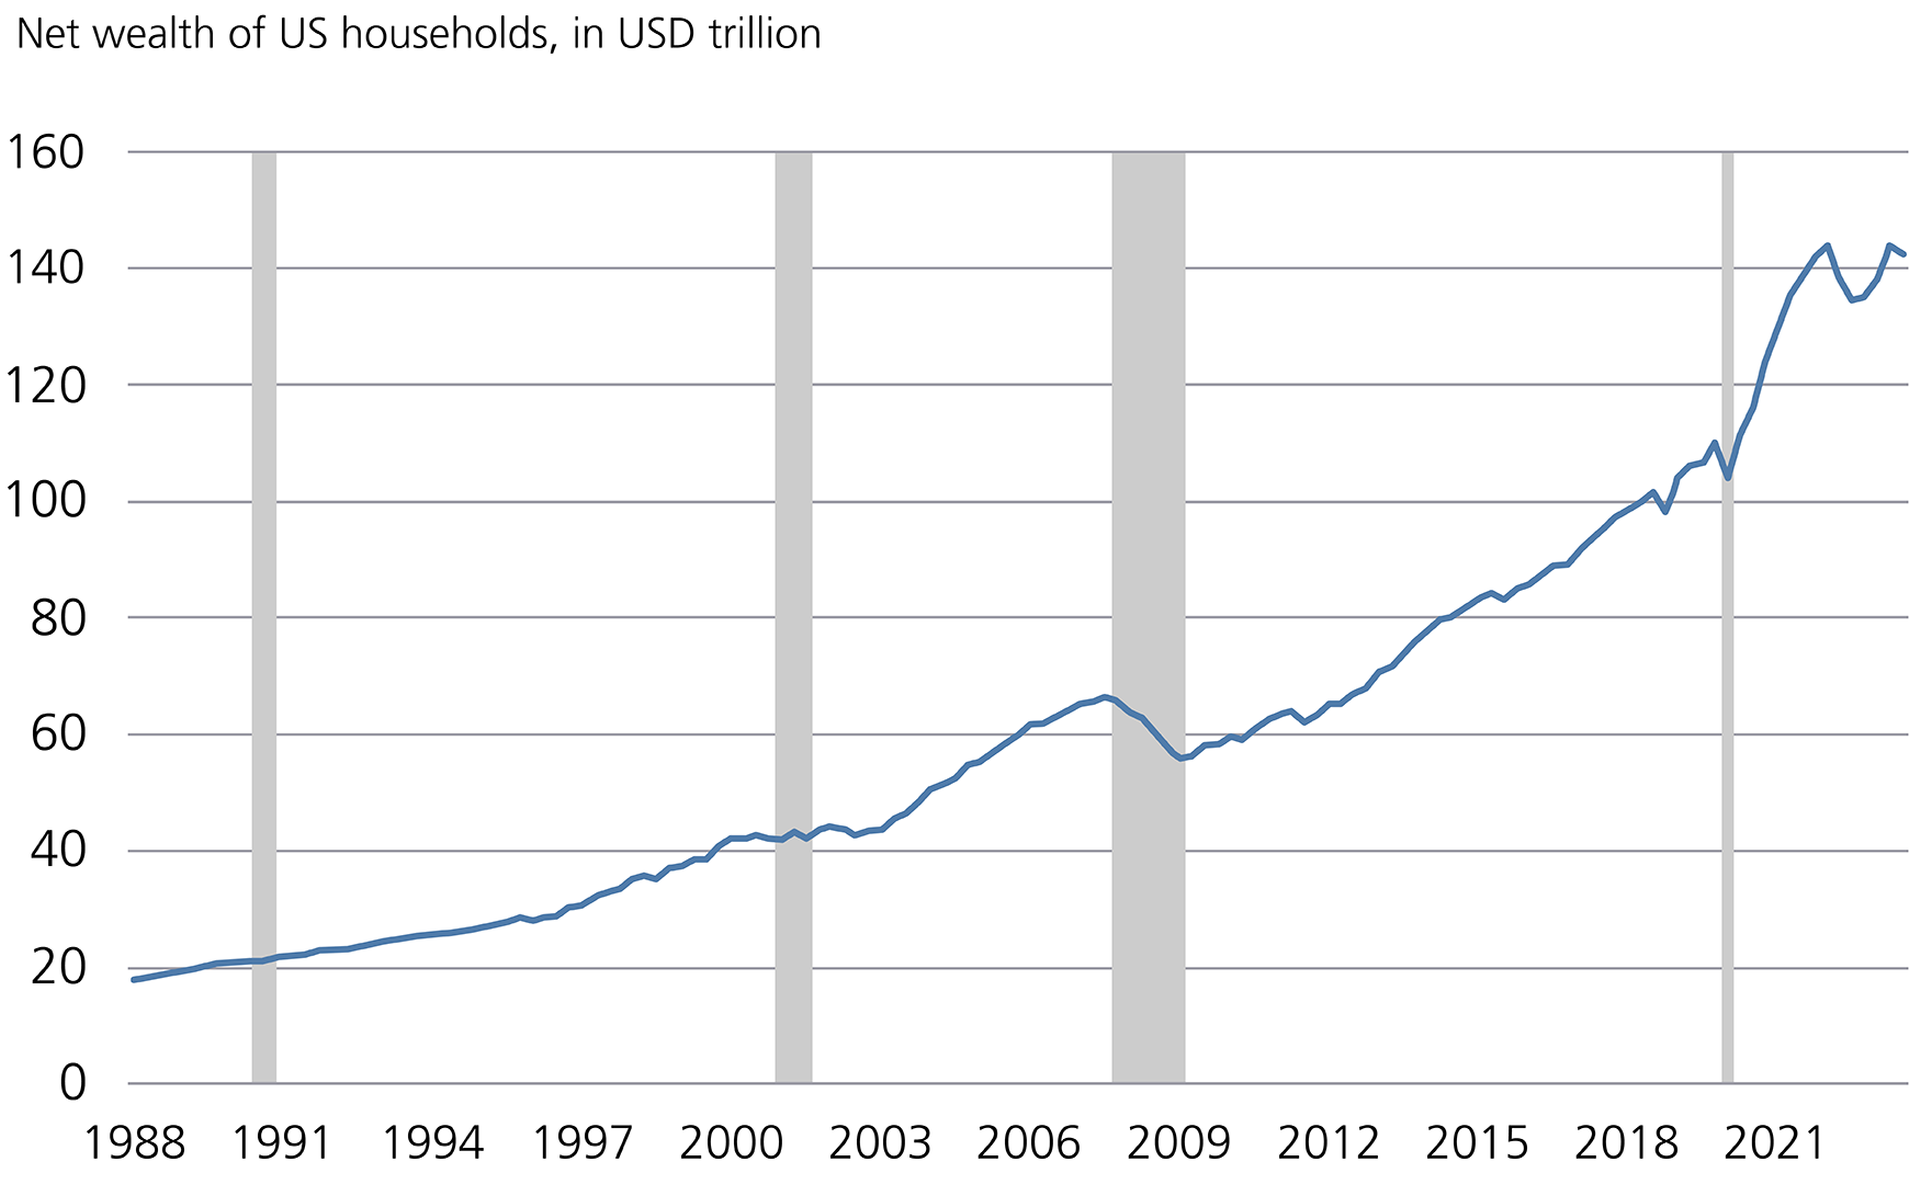 Net wealth of US households remains high